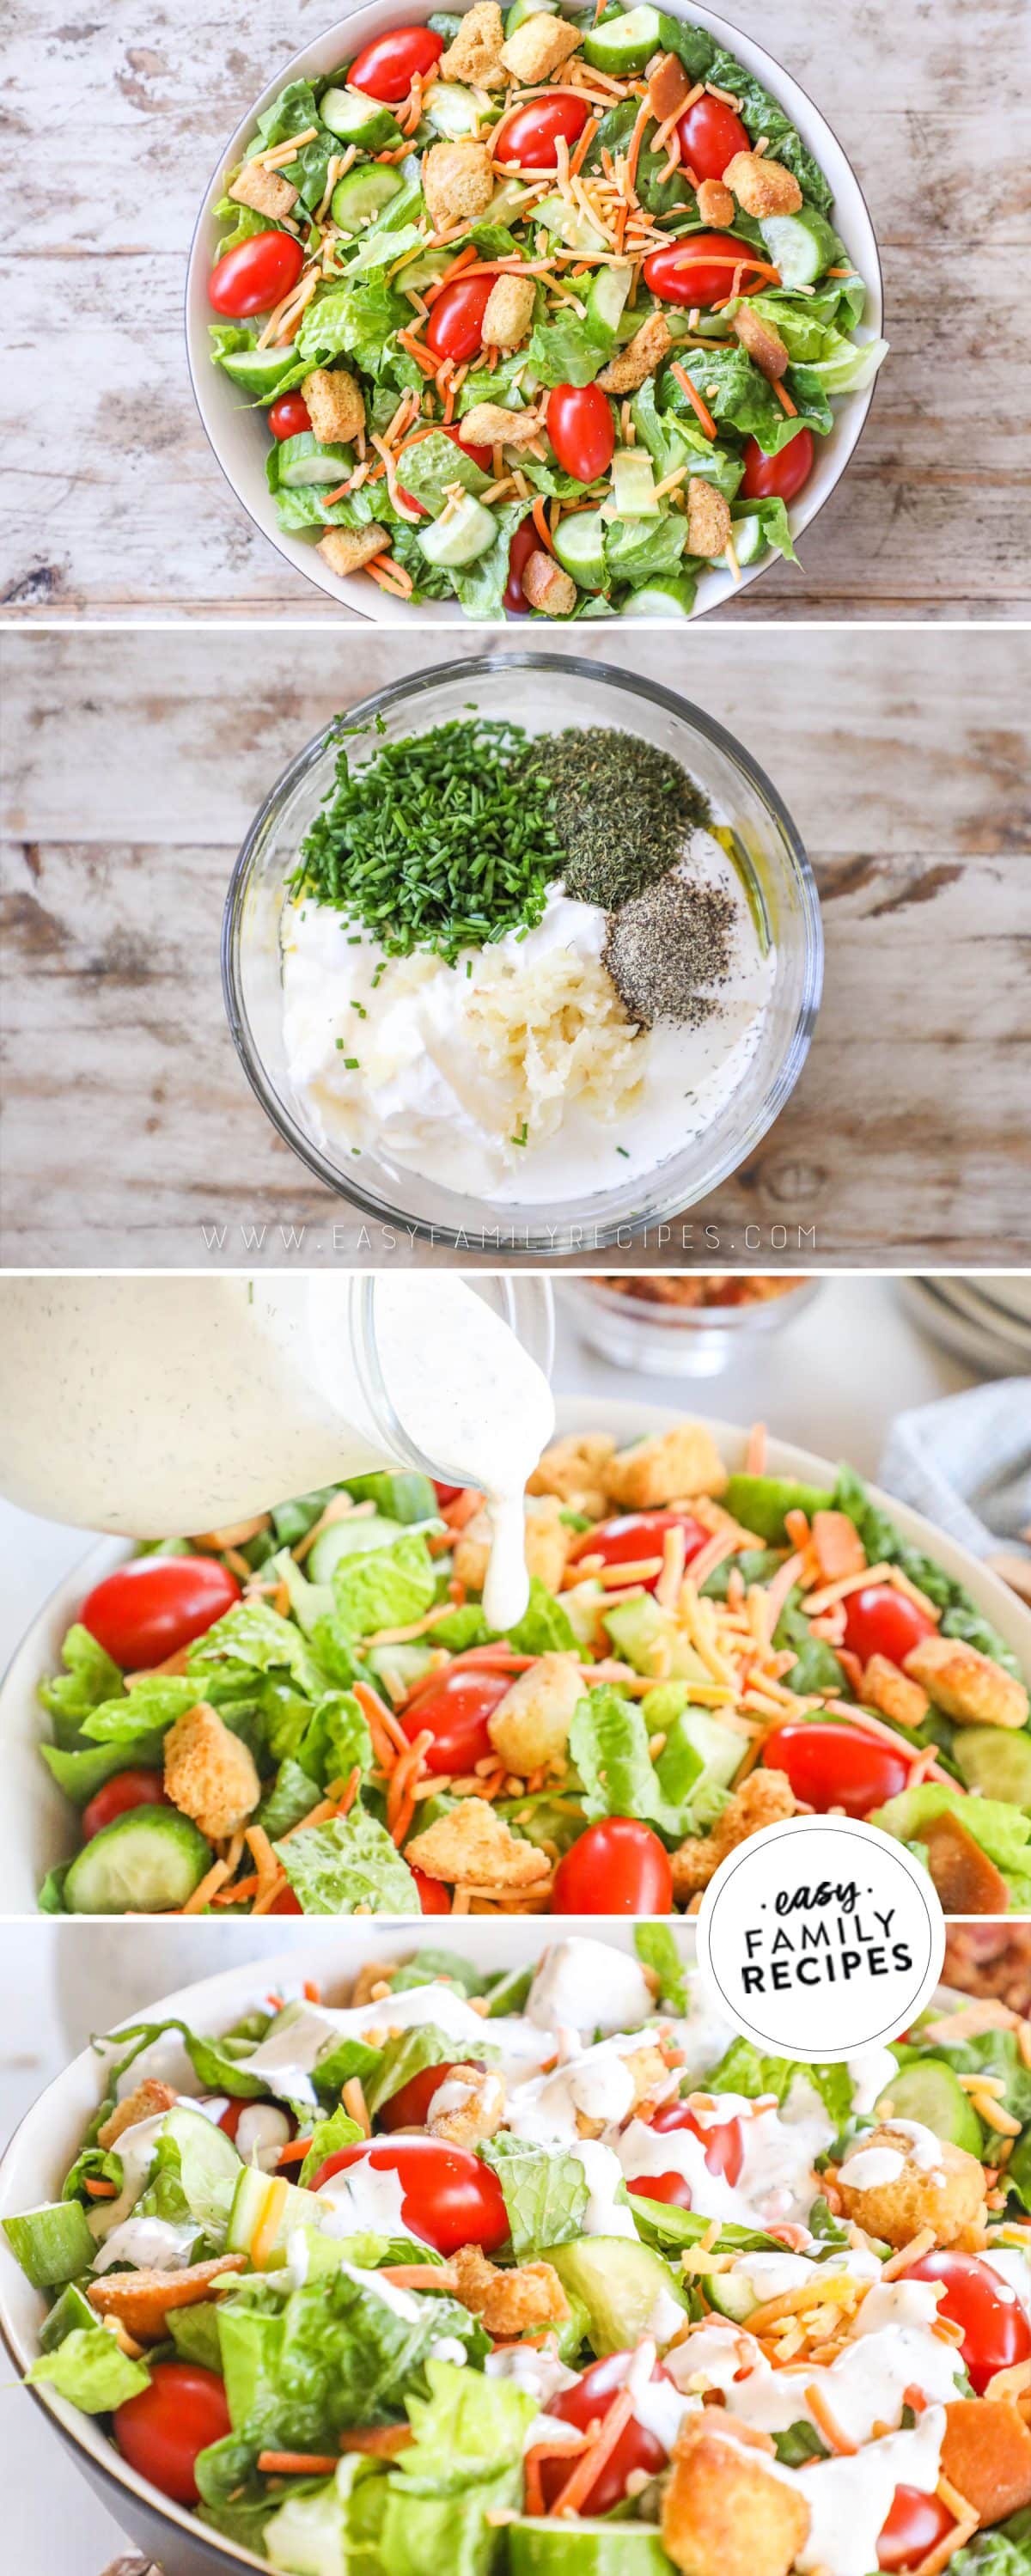 process photos for how to make a steakhouse house salad 1. arrange the lettuce and vegetables. 2. Make the buttermilk ranch dressing. 3. Pour the dressing over the salad. 4. Serve salad immediately